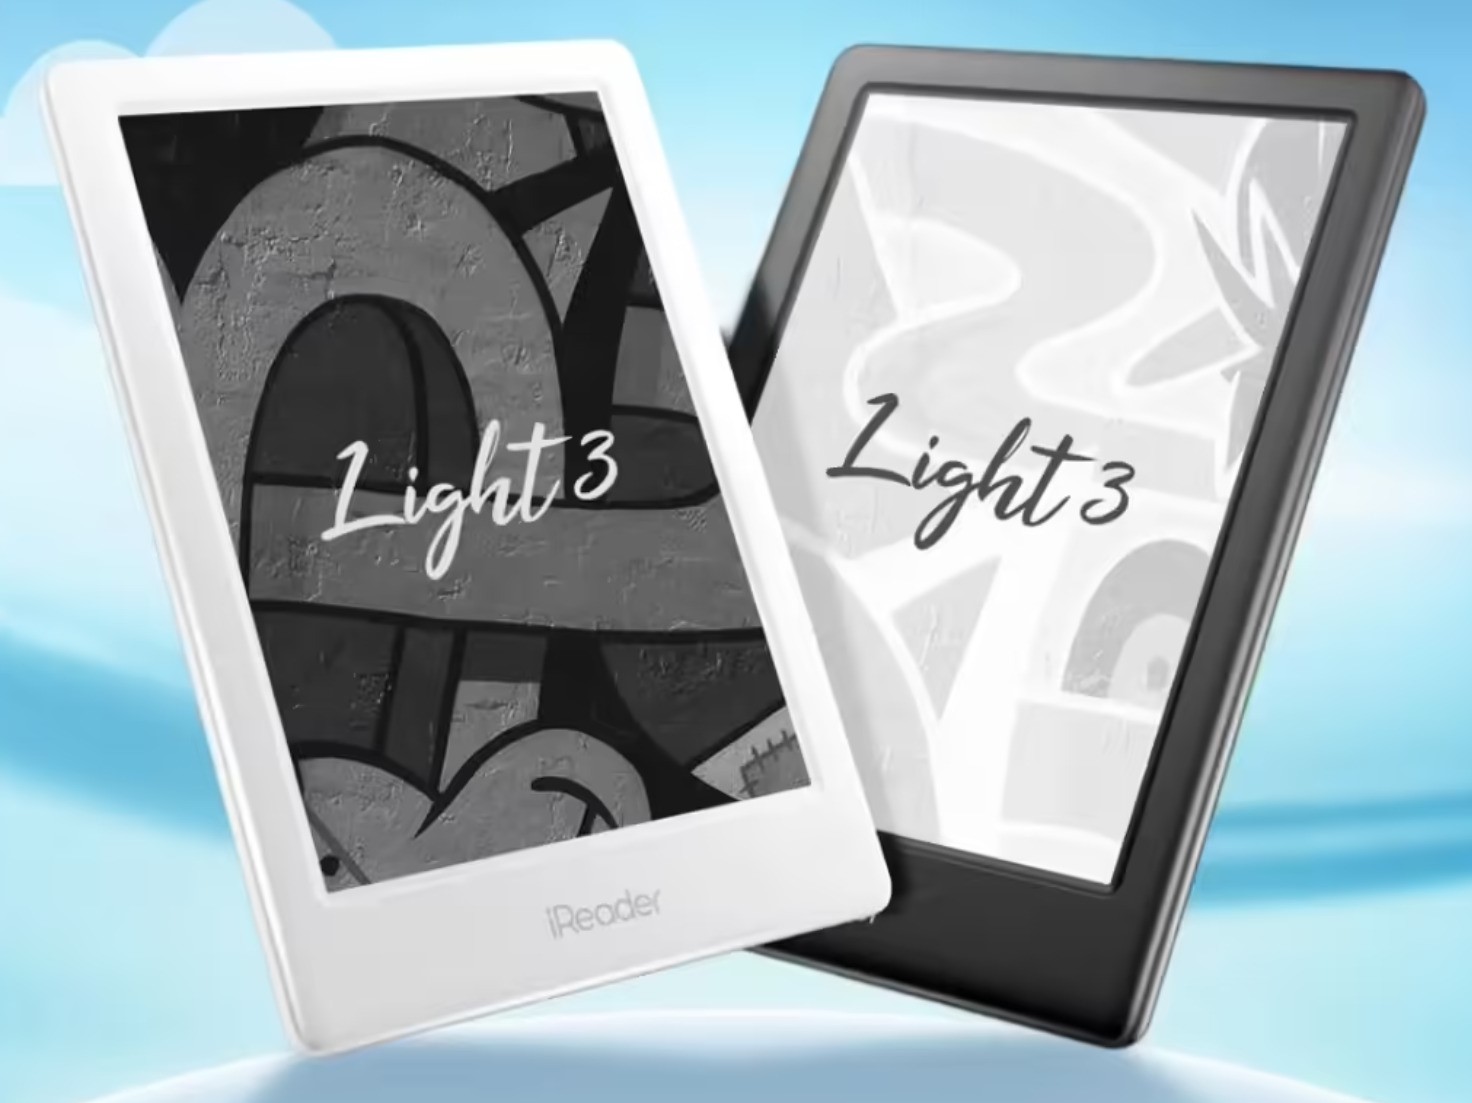 ONYX BOOX Magellan 5: New e-Reader available for US$179.99 with E Ink Carta  Plus display -  News